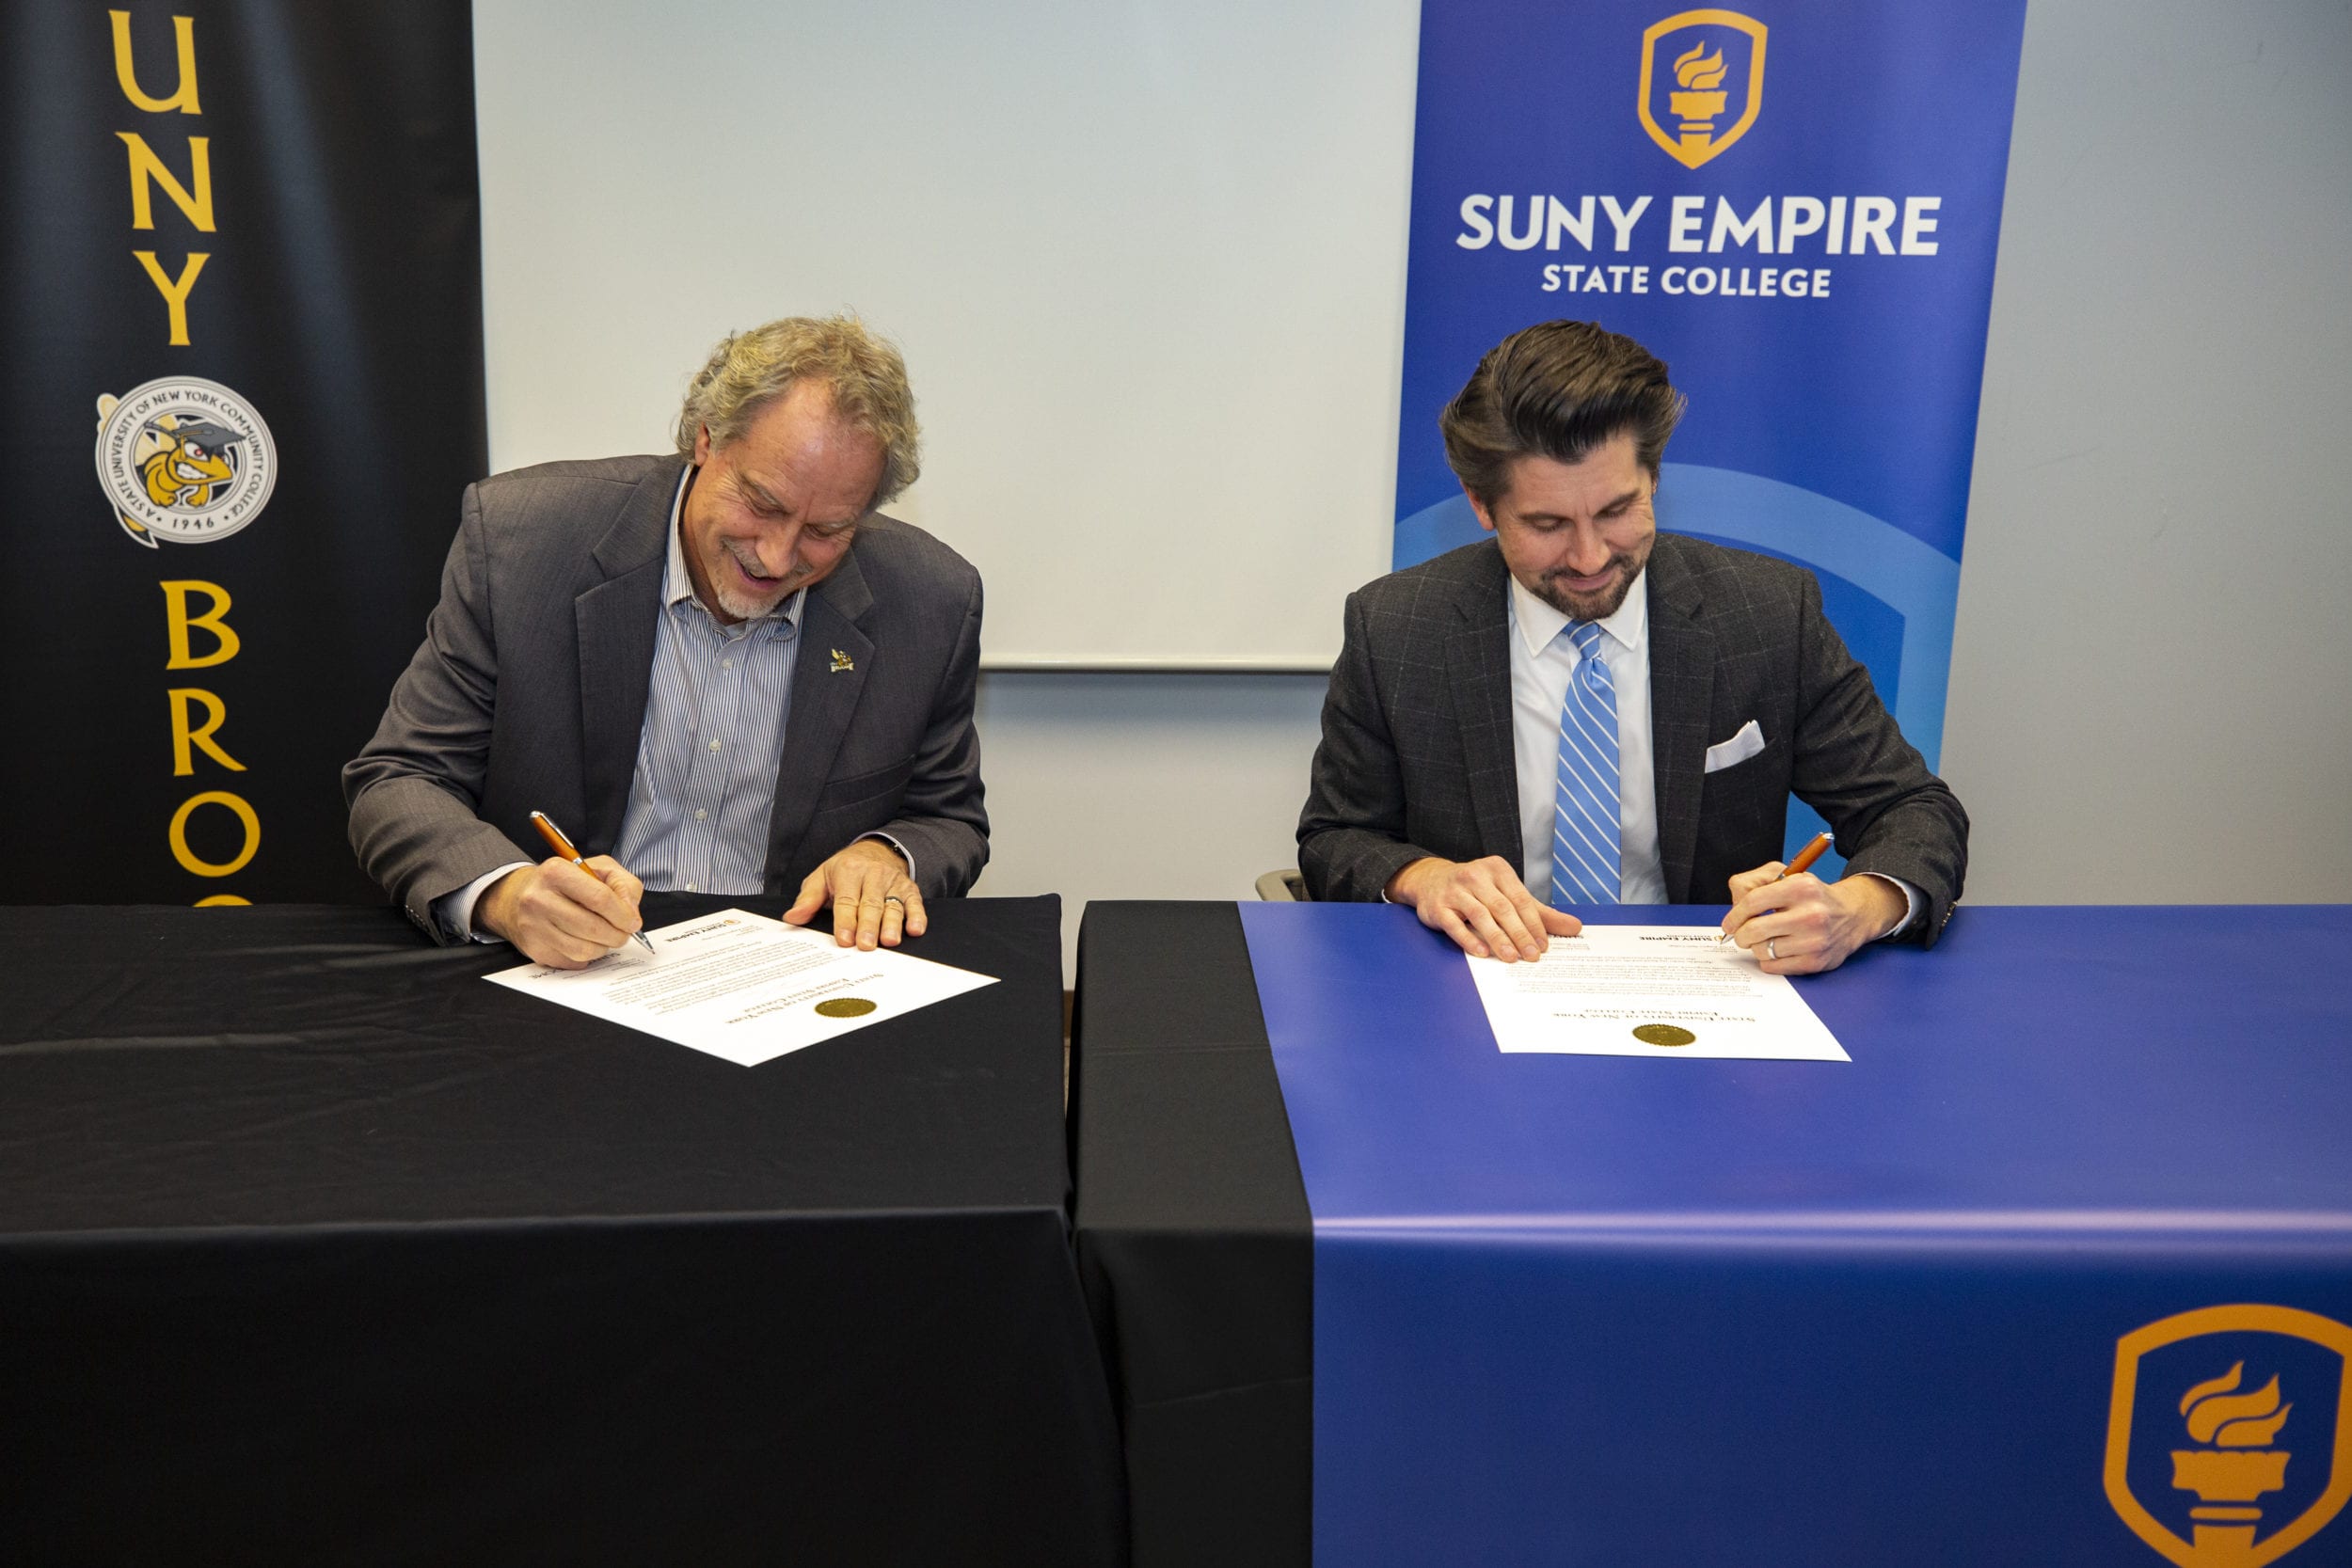 SUNY Empire State College President Jim Malatras and SUNY Broome President Kevin Drumm (left) sign a transfer agreement between the two schools